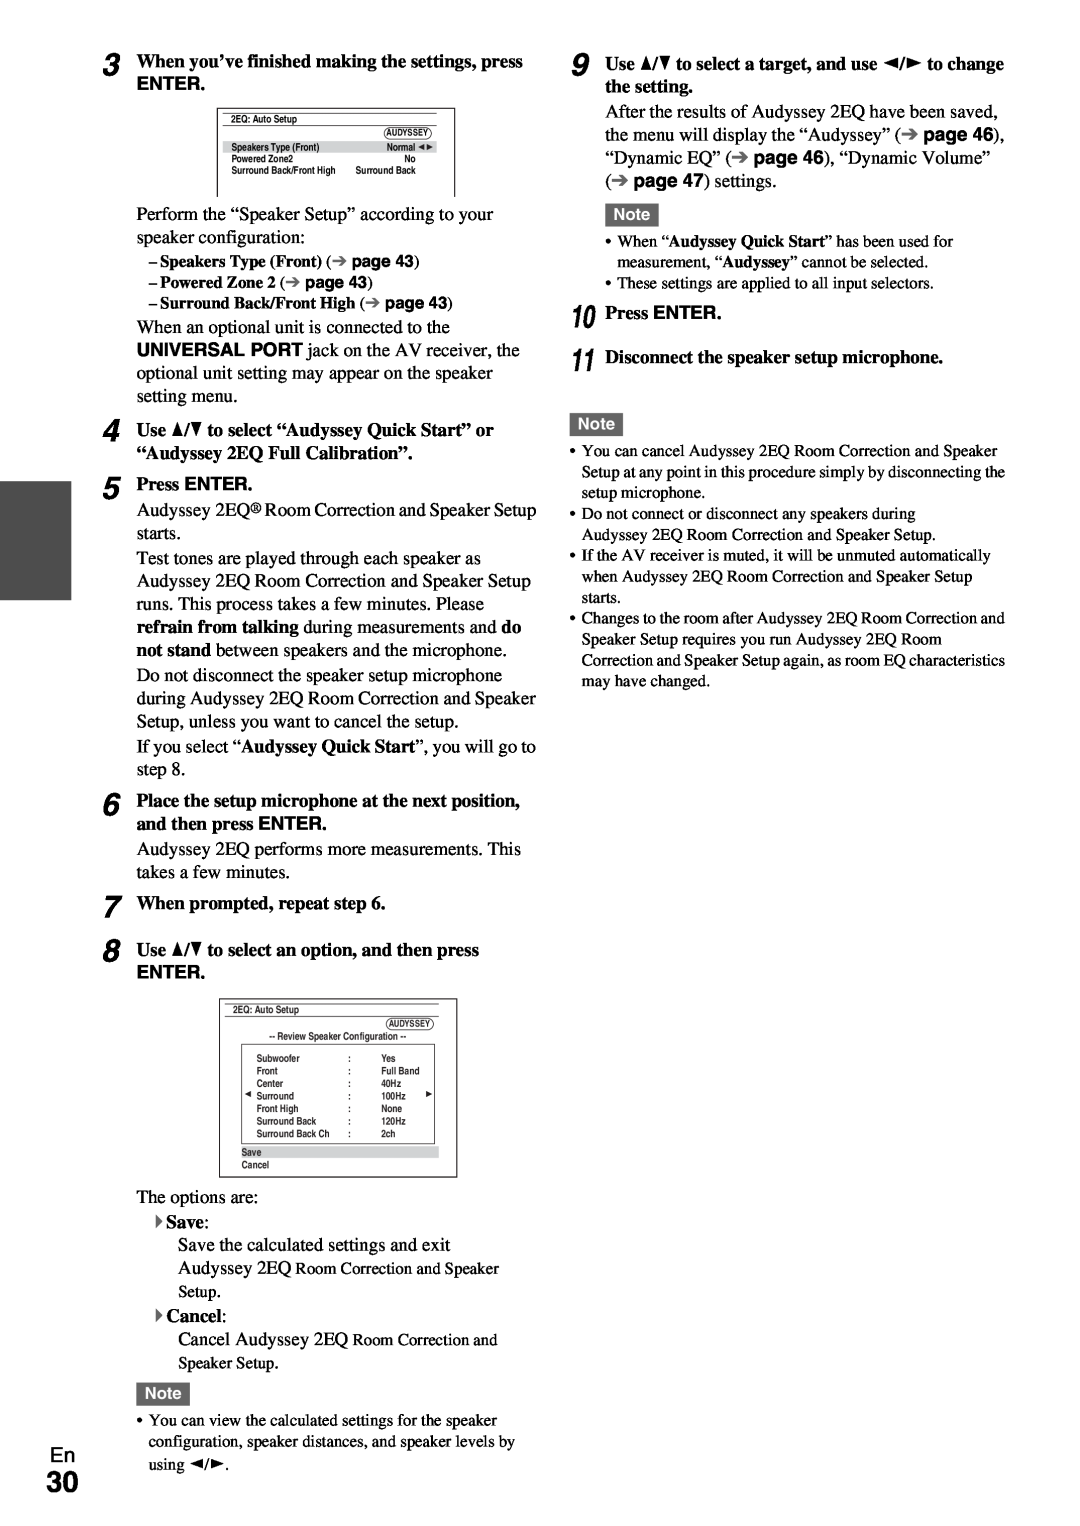 Onkyo TX-NR579 instruction manual When you’ve finished making the settings, press, Enter 